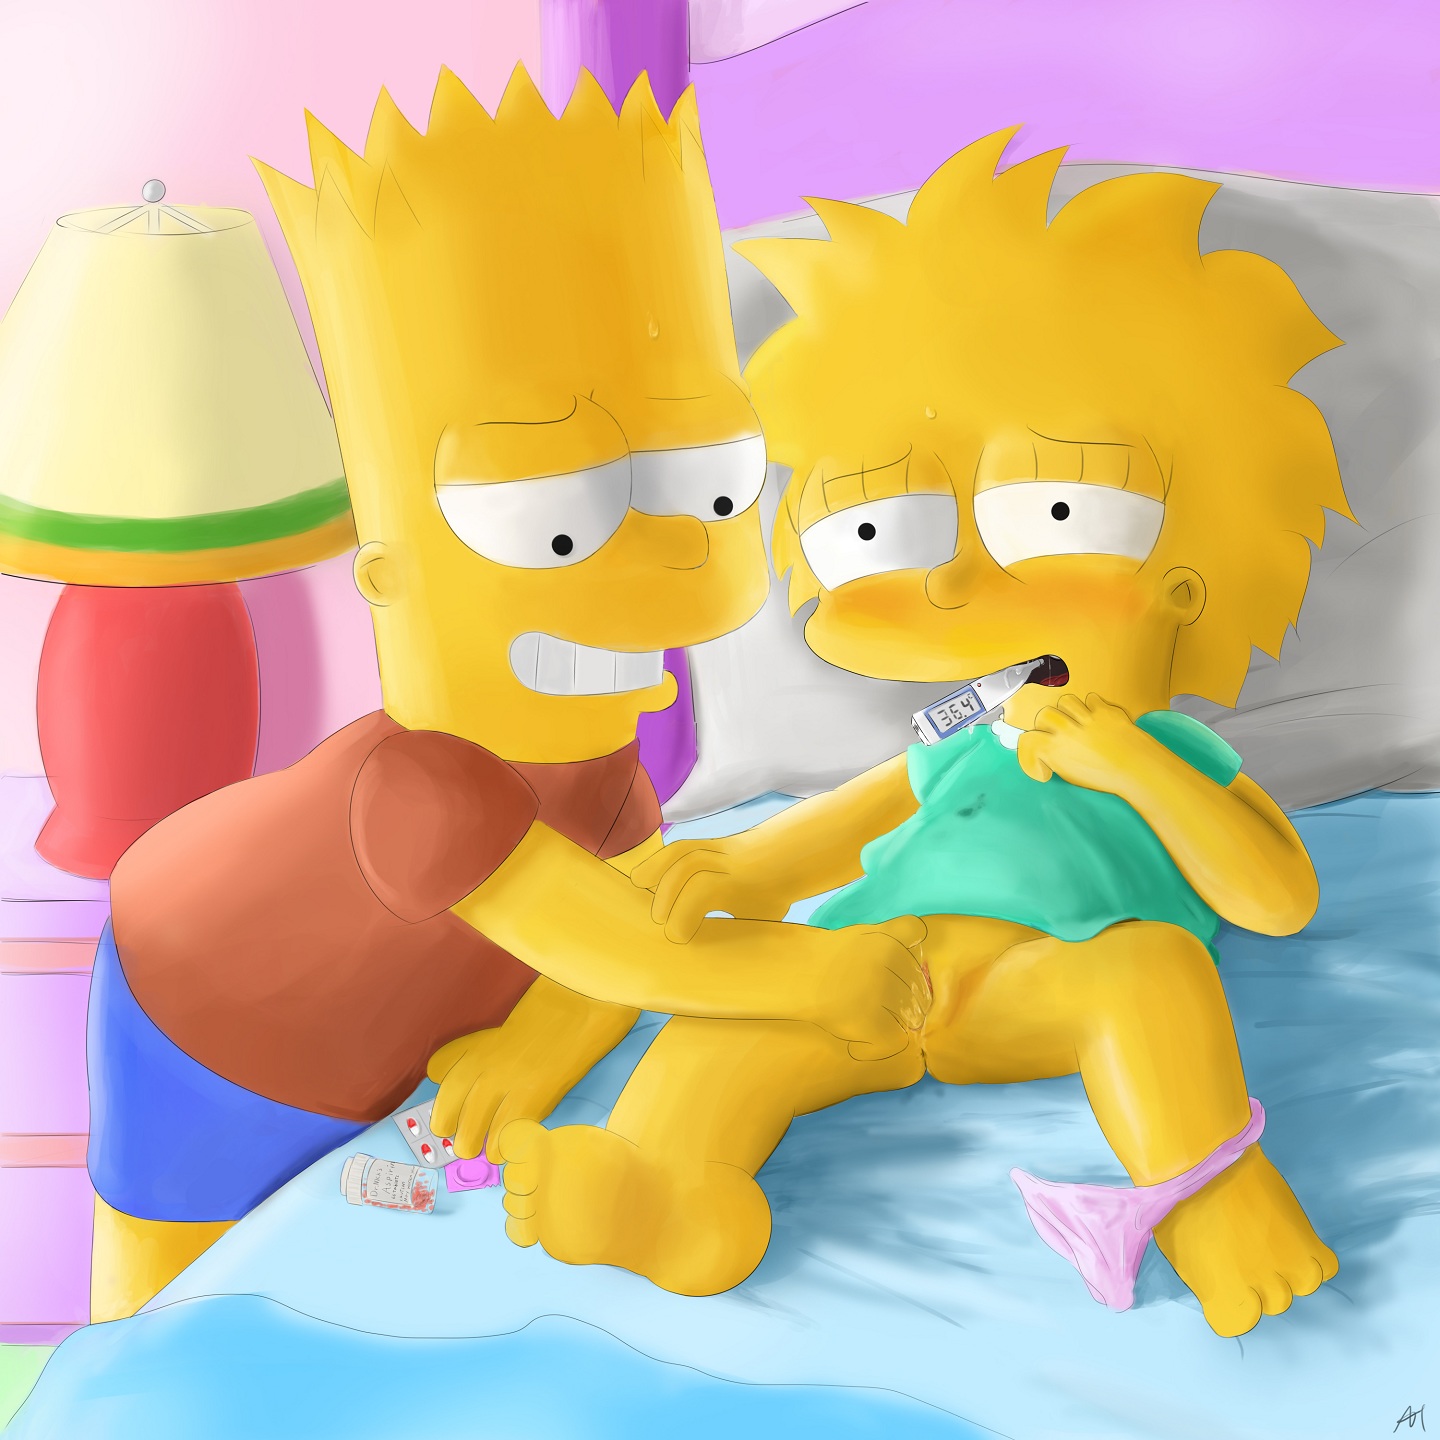 Simpson fuck bart Search Results